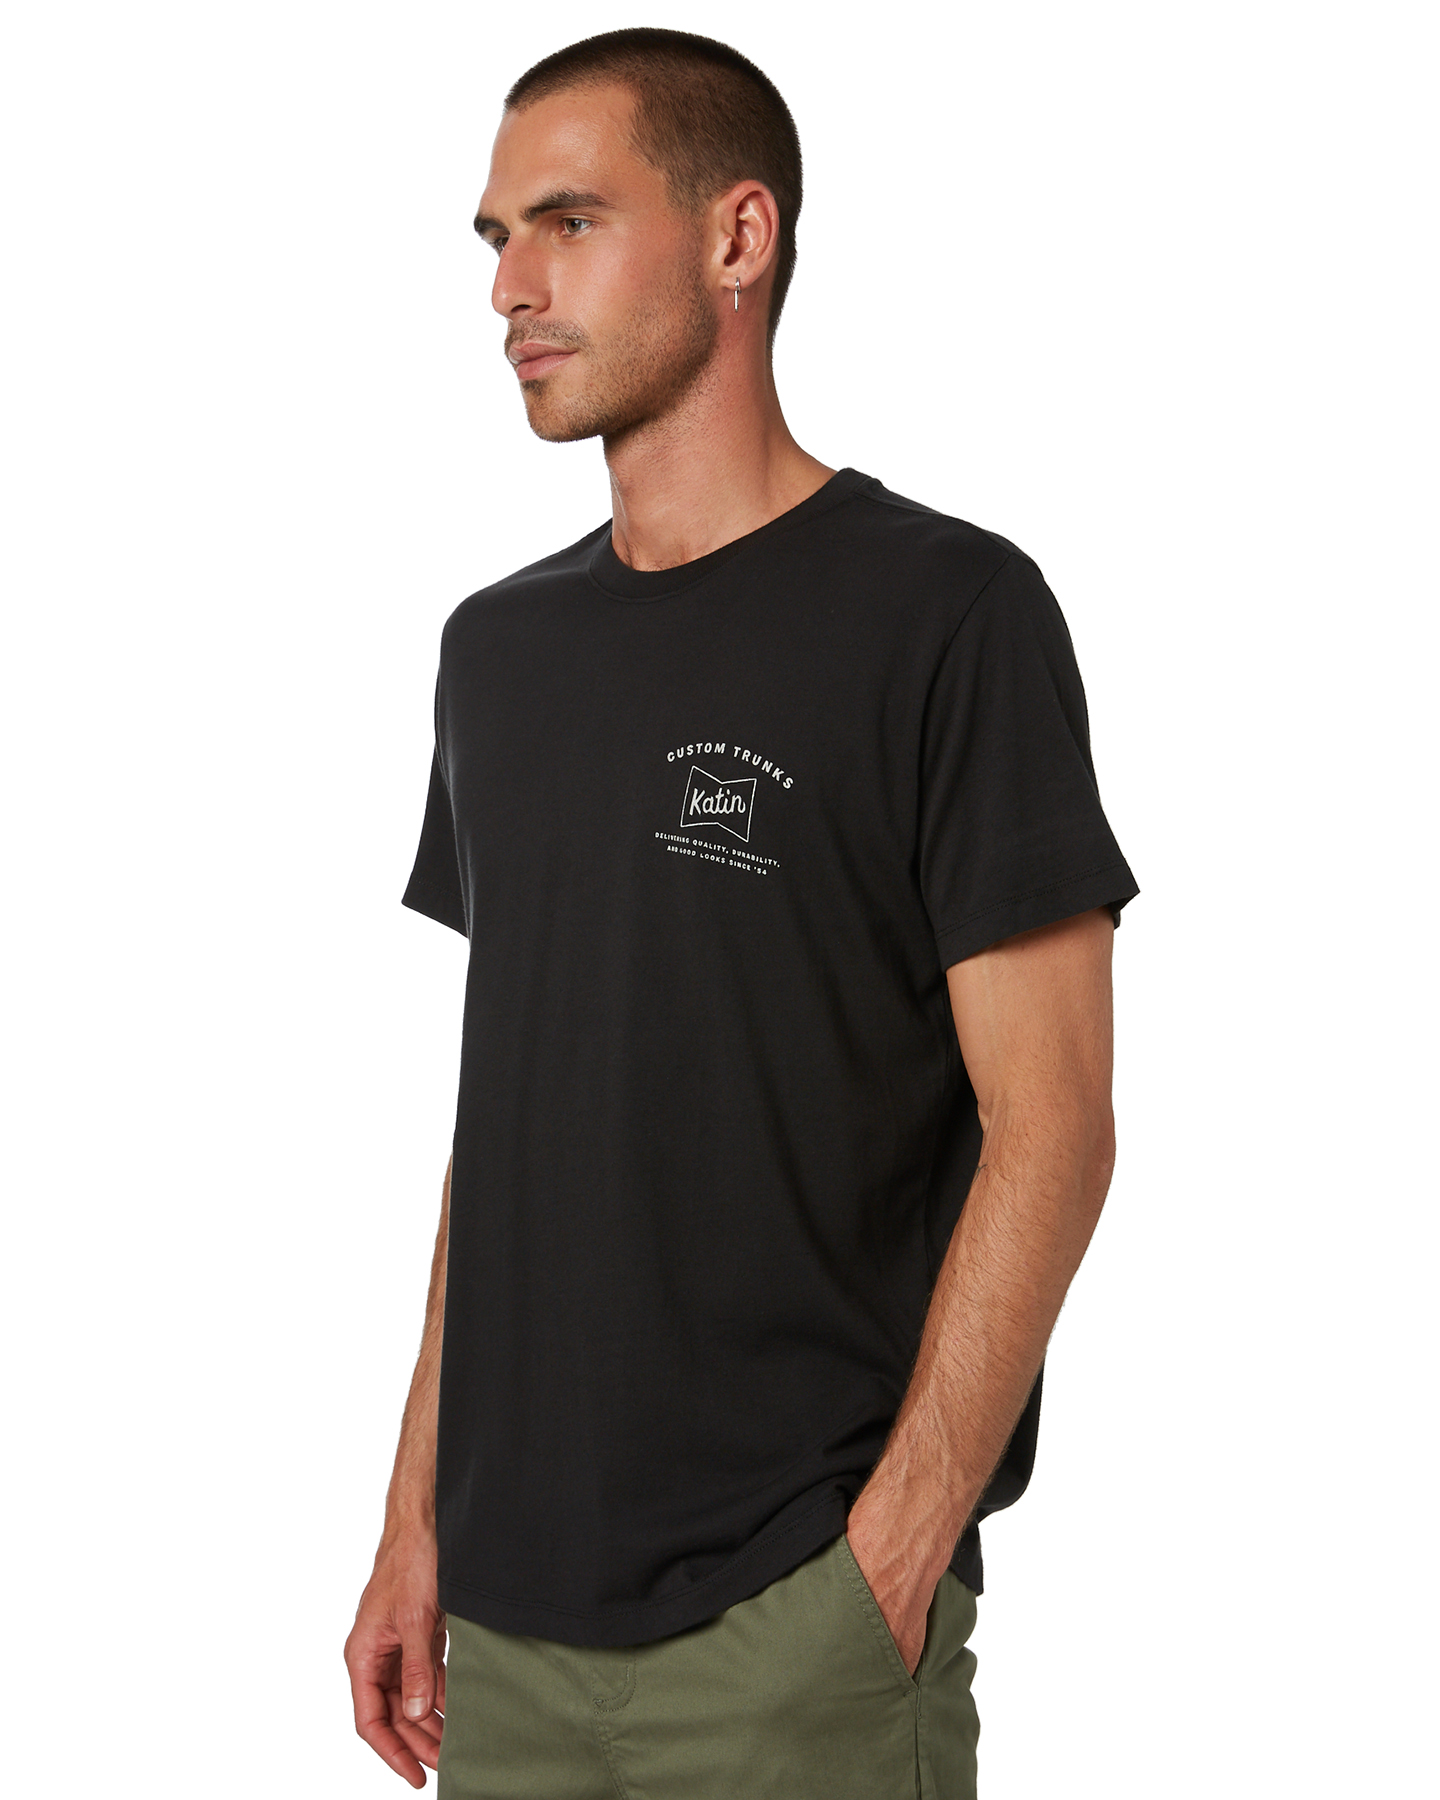 Katin Delivery Ls Mens Tee - Black Wash | SurfStitch